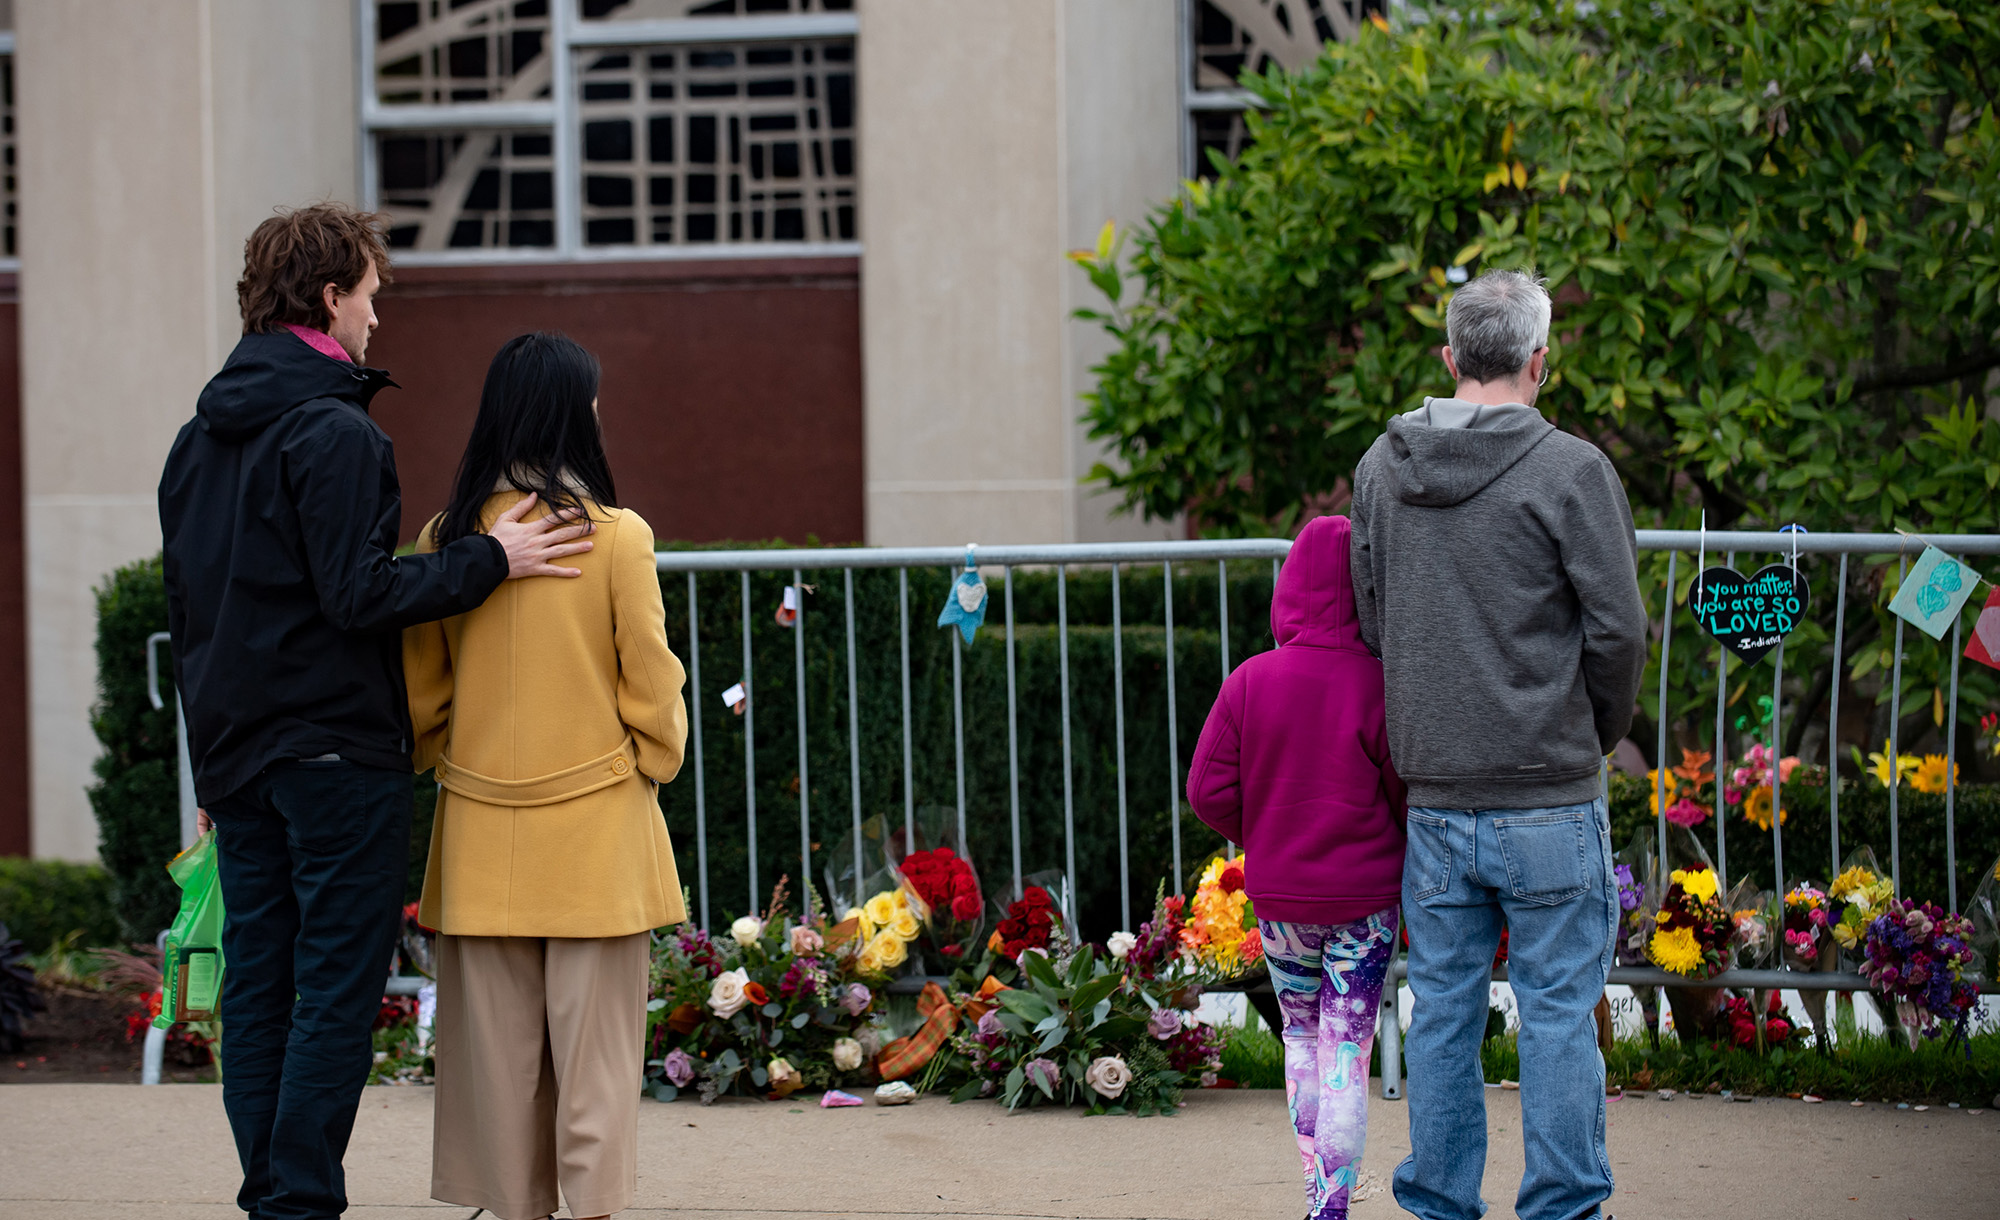 
Mourners along the fence at the Tree of Life Synagogue on the first anniversary of the attack on October 27, 2019 in Pittsburgh, Pennsylvania. Jeff Swensen/Getty Images.






